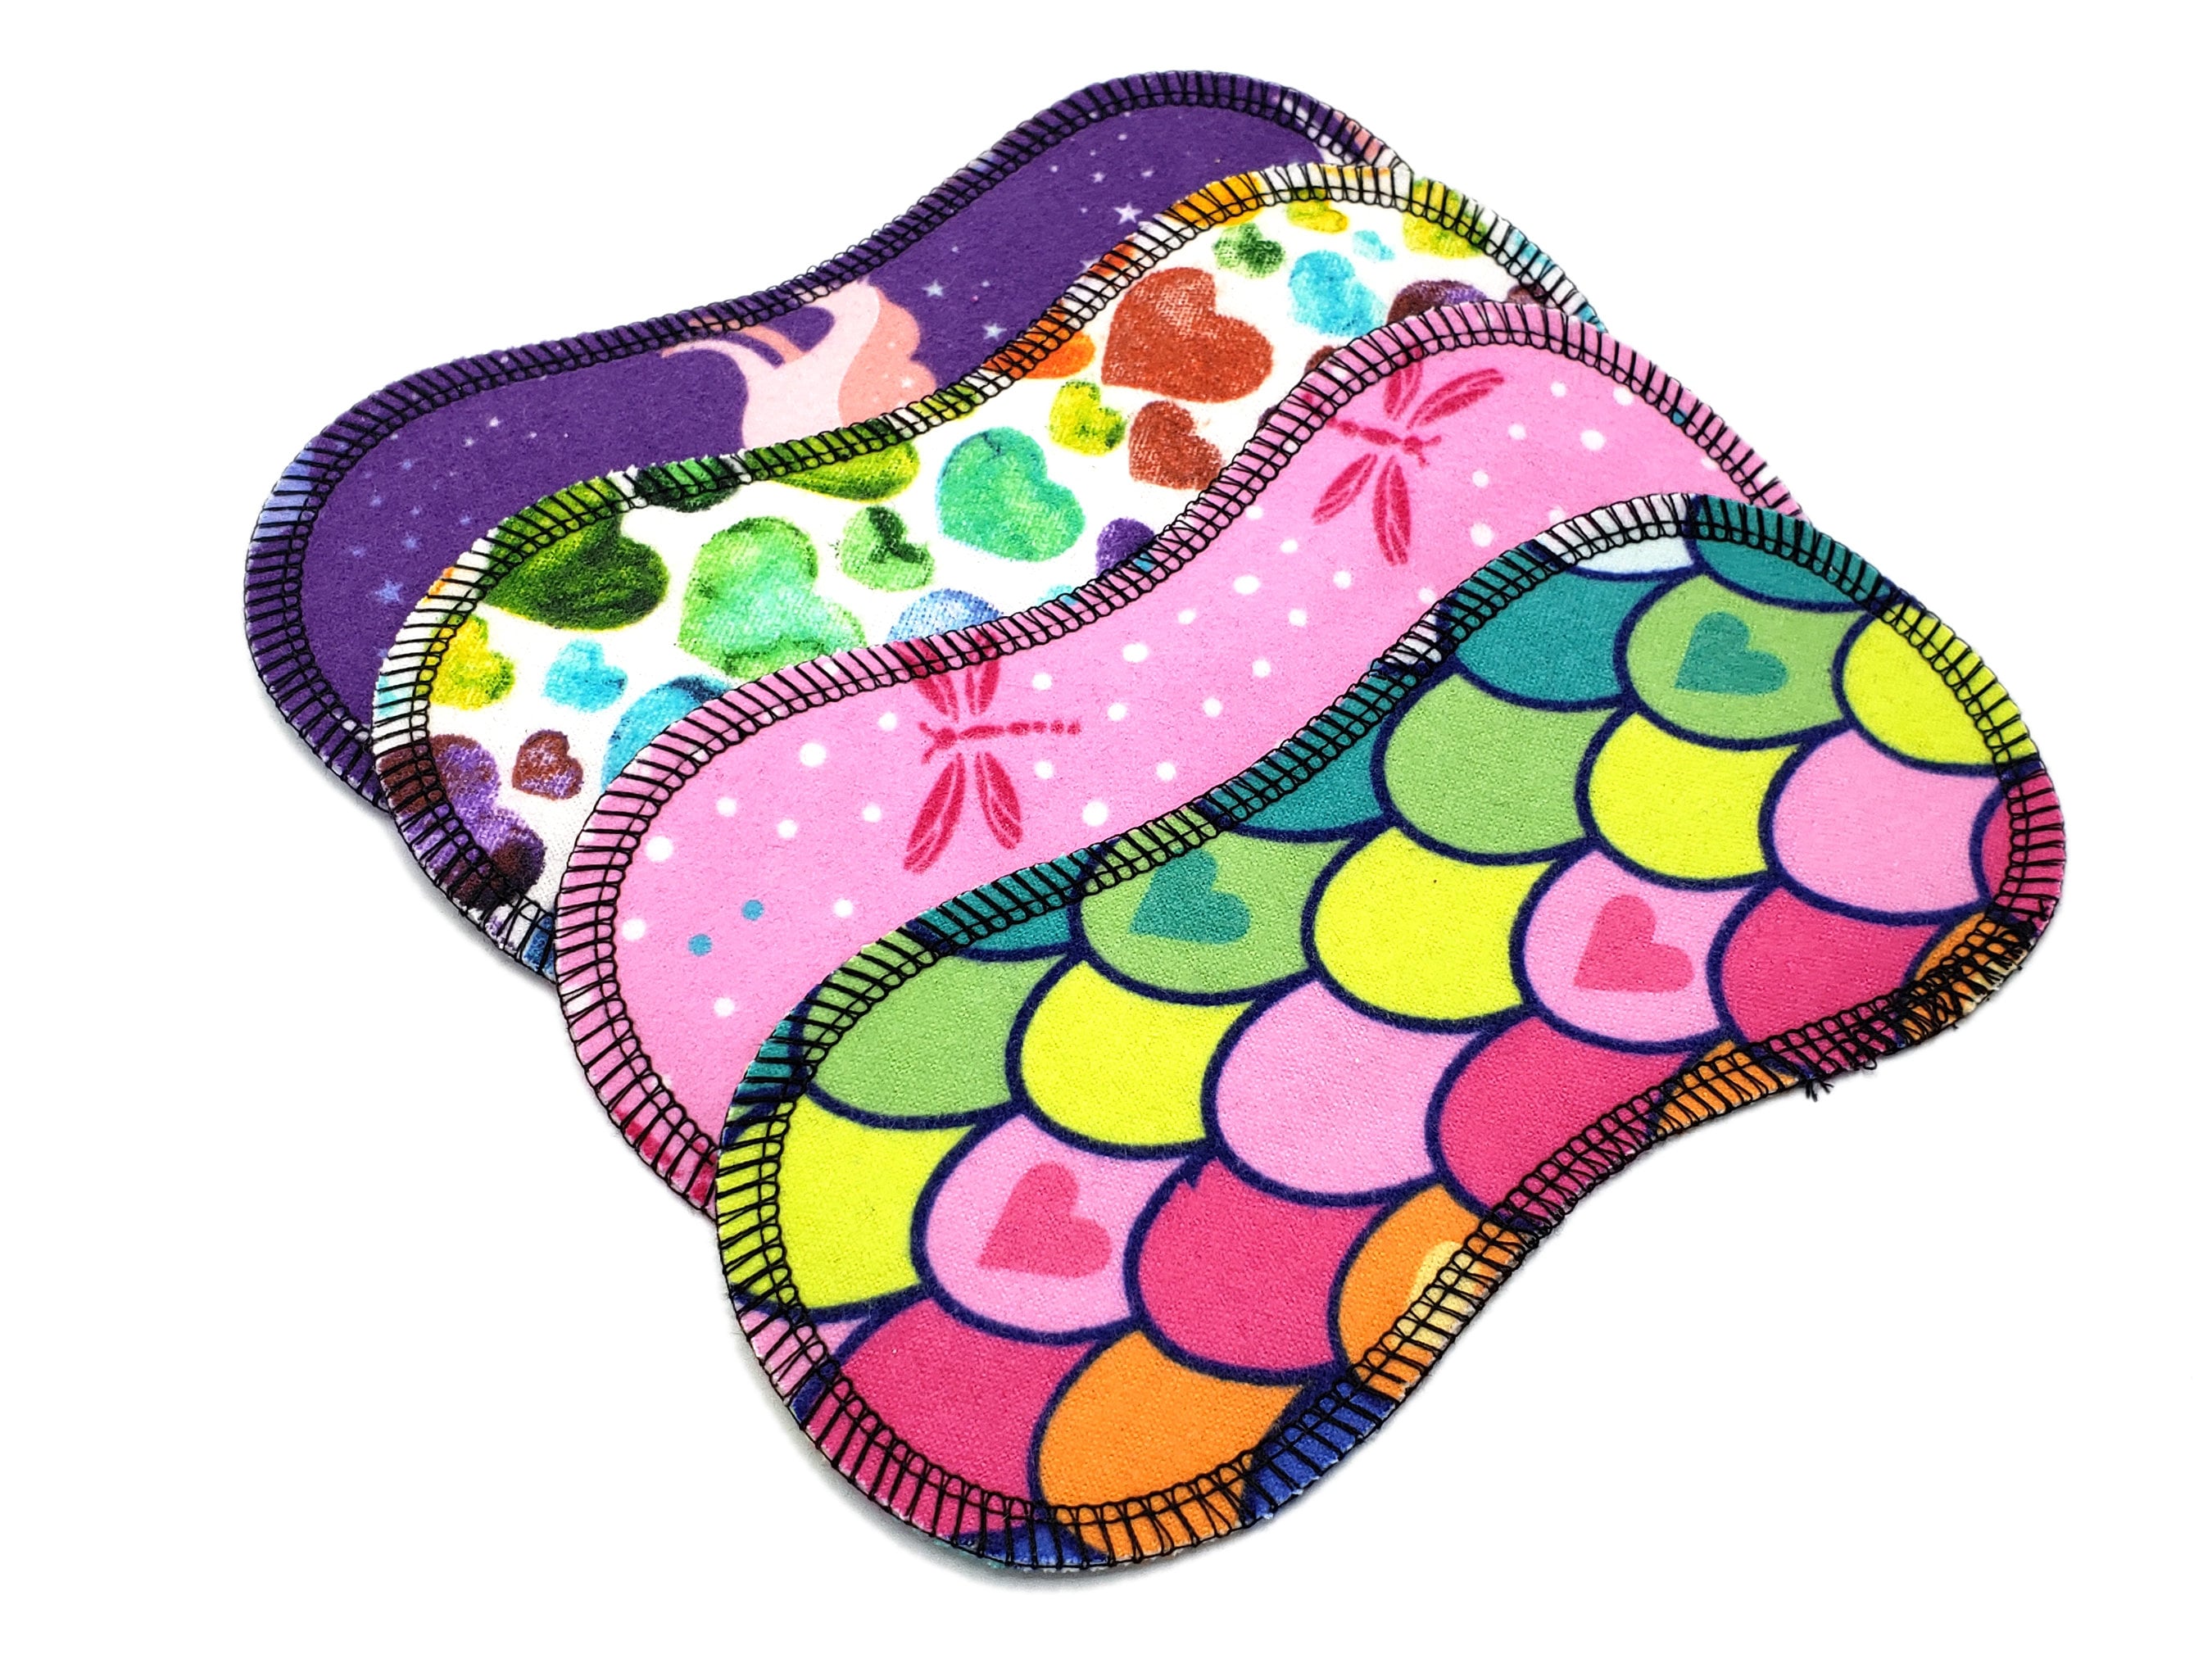 Wingless Panty Liners, Super Soft and Leakproof Cotton Flannel Panty Liners  for Light Flow, Cotton Flannel Pads, Zero Waste, Surprise Prints